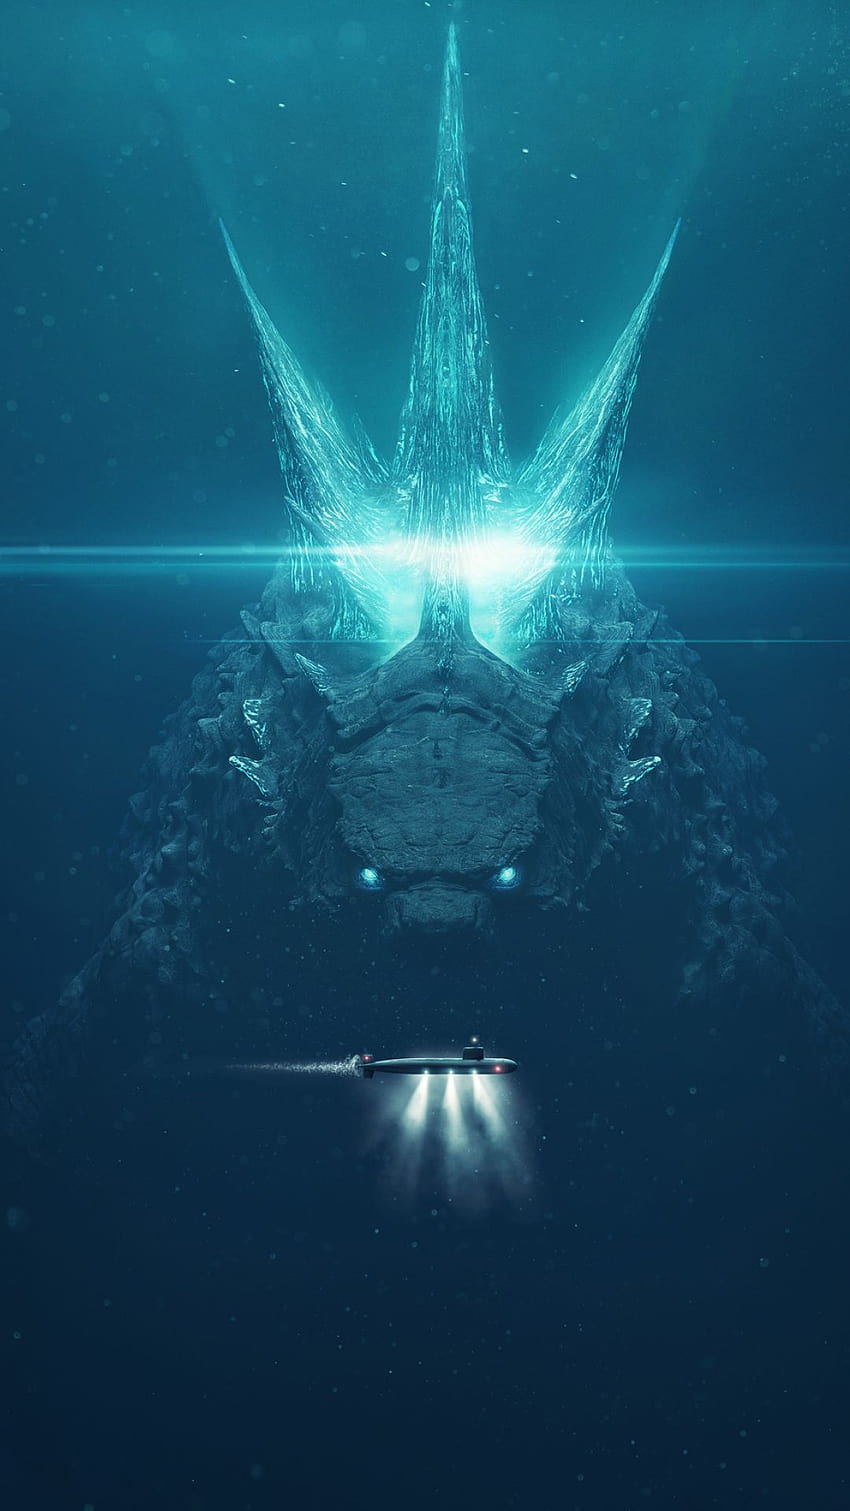 1080x1920 Godzilla King of the Monsters 2019 Poster Iphone 7, 6s, 6 Plus und Pixel XL ,One Plus 3, 3t, 5 , Filme , und …, Godzilla King of the Monsters iphone HD-Handy-Hintergrundbild